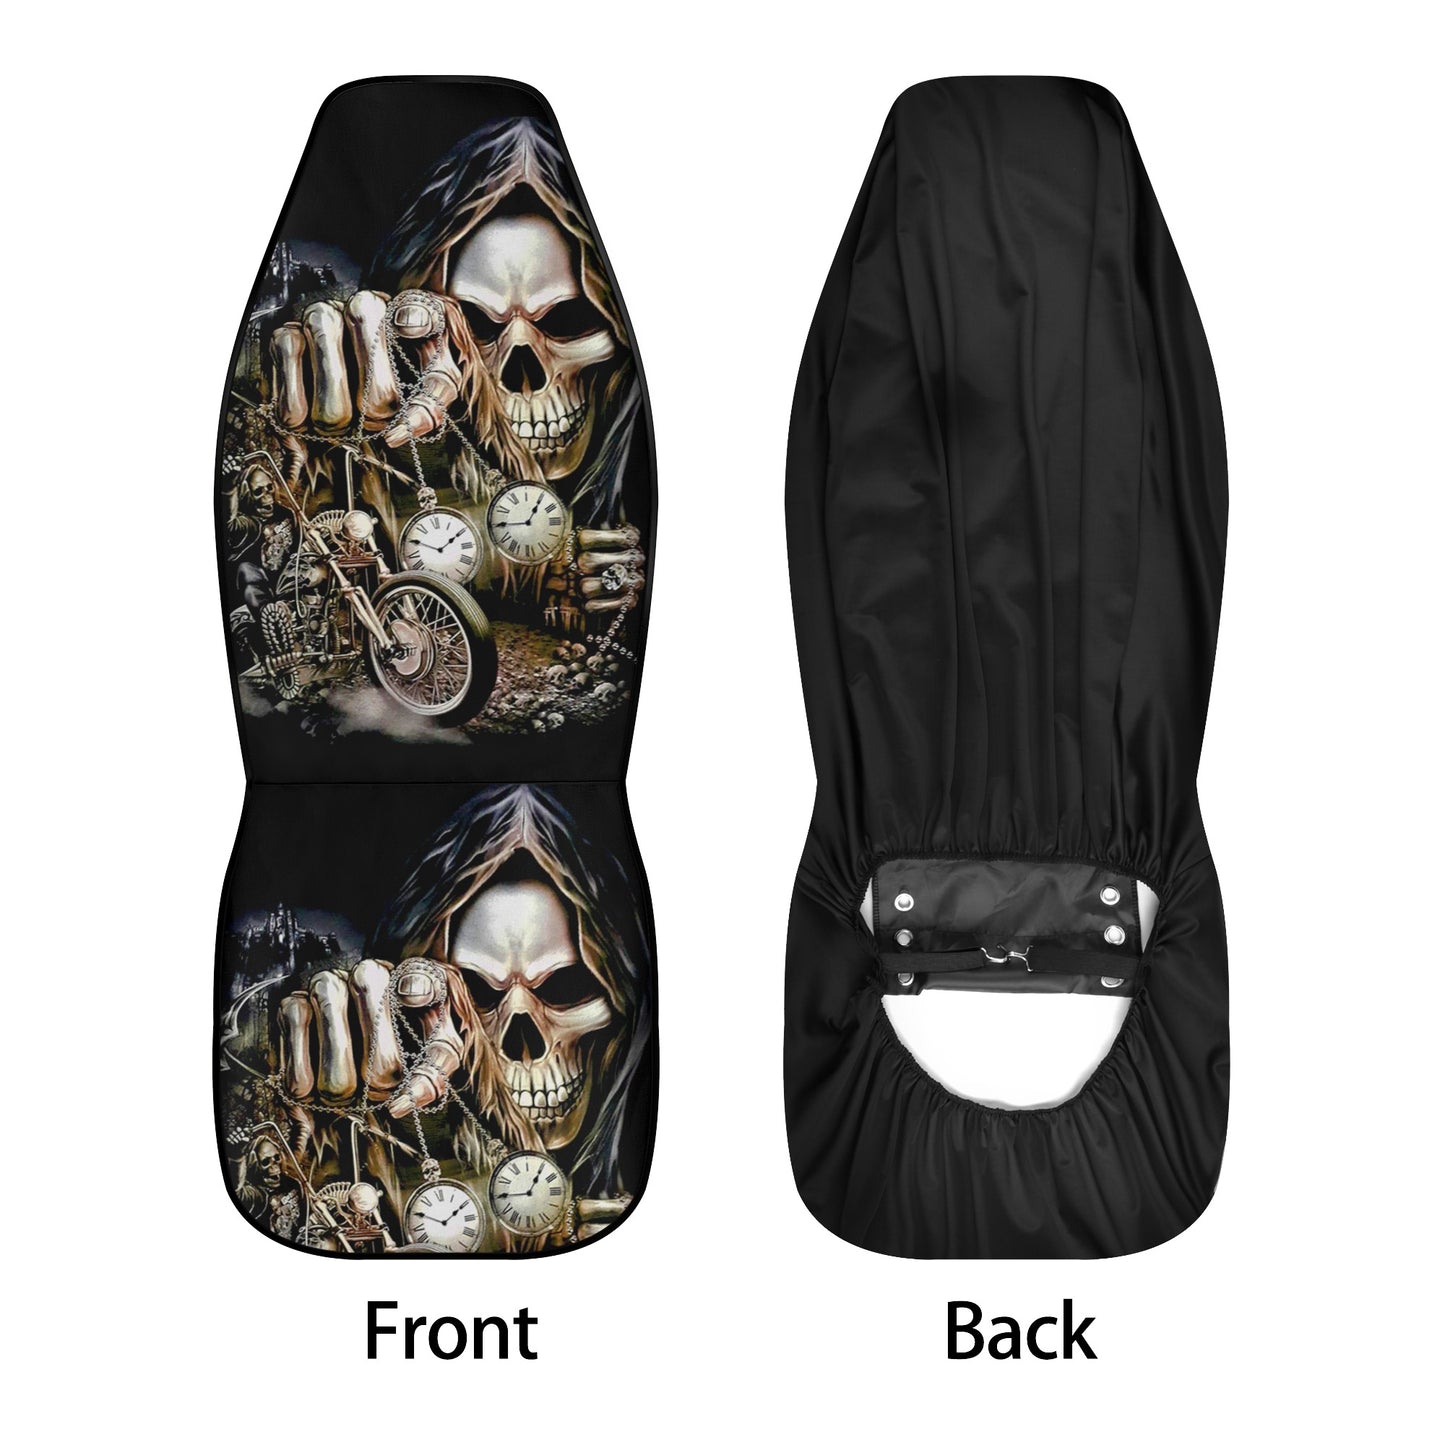 Punisher skull car seat cushion cover, punisher skull seat cover for truck, motorcycle skull car seat cover, flaming skull front and back ca